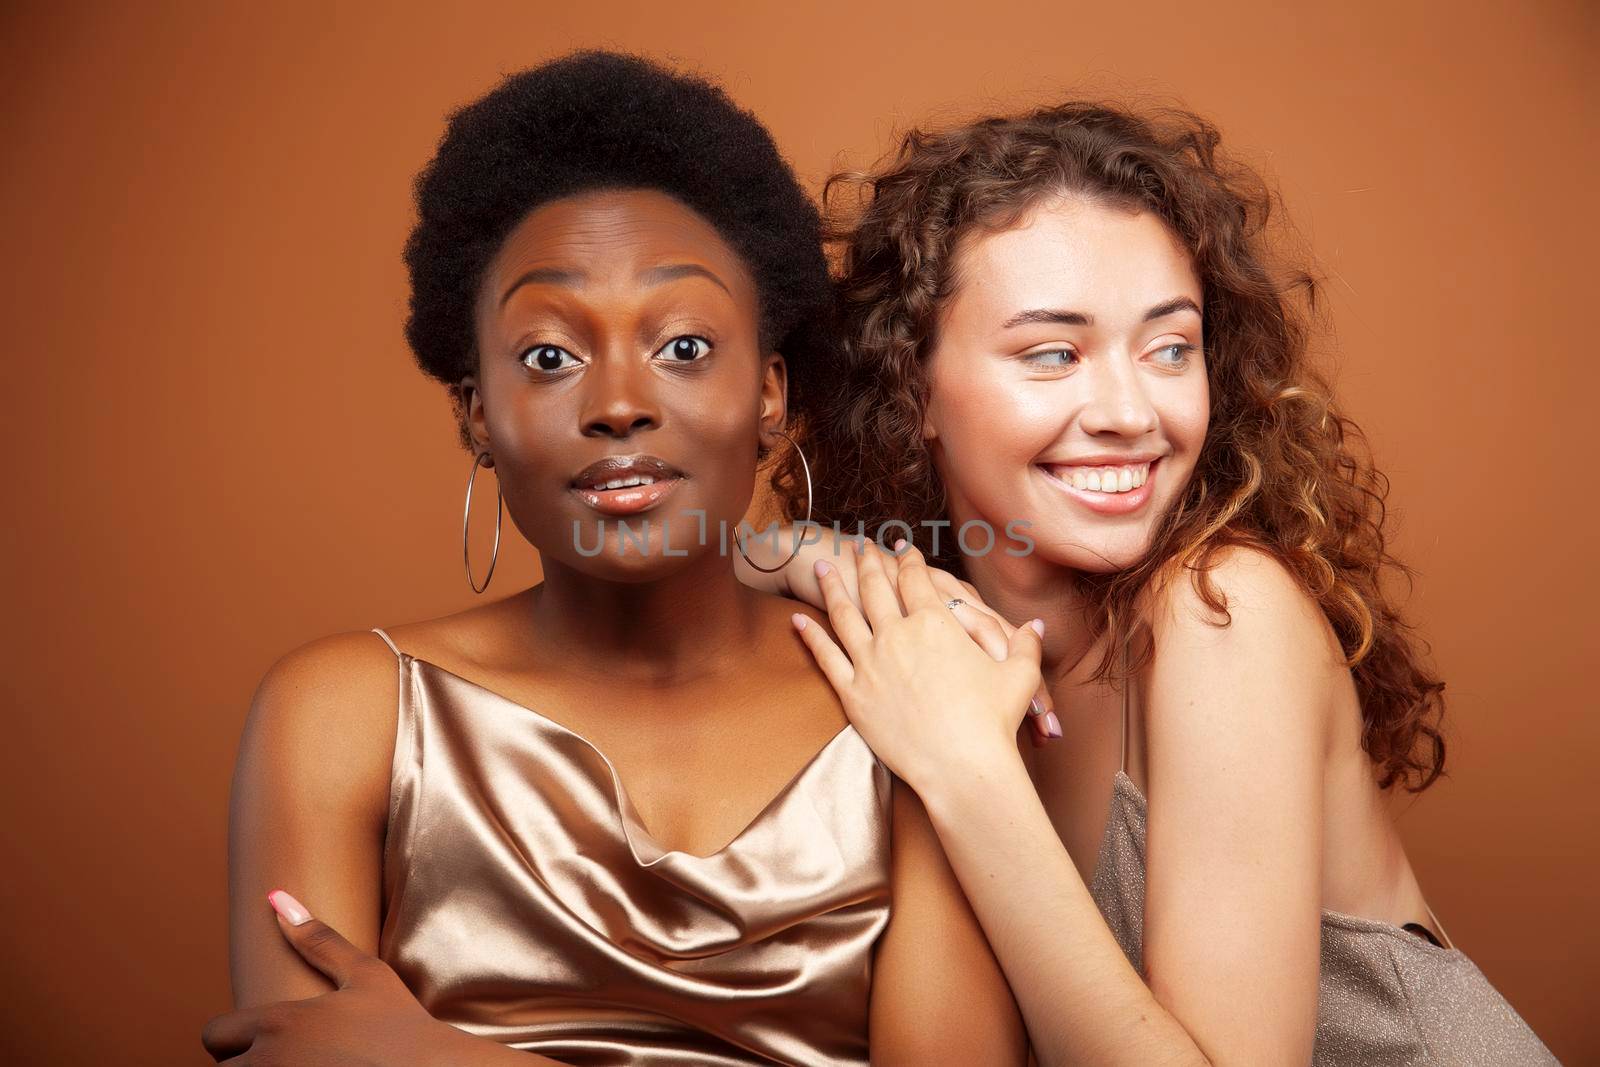 two pretty girls african and caucasian blond posing cheerful together on brown background, etnithity diverse lifestyle people concept by JordanJ